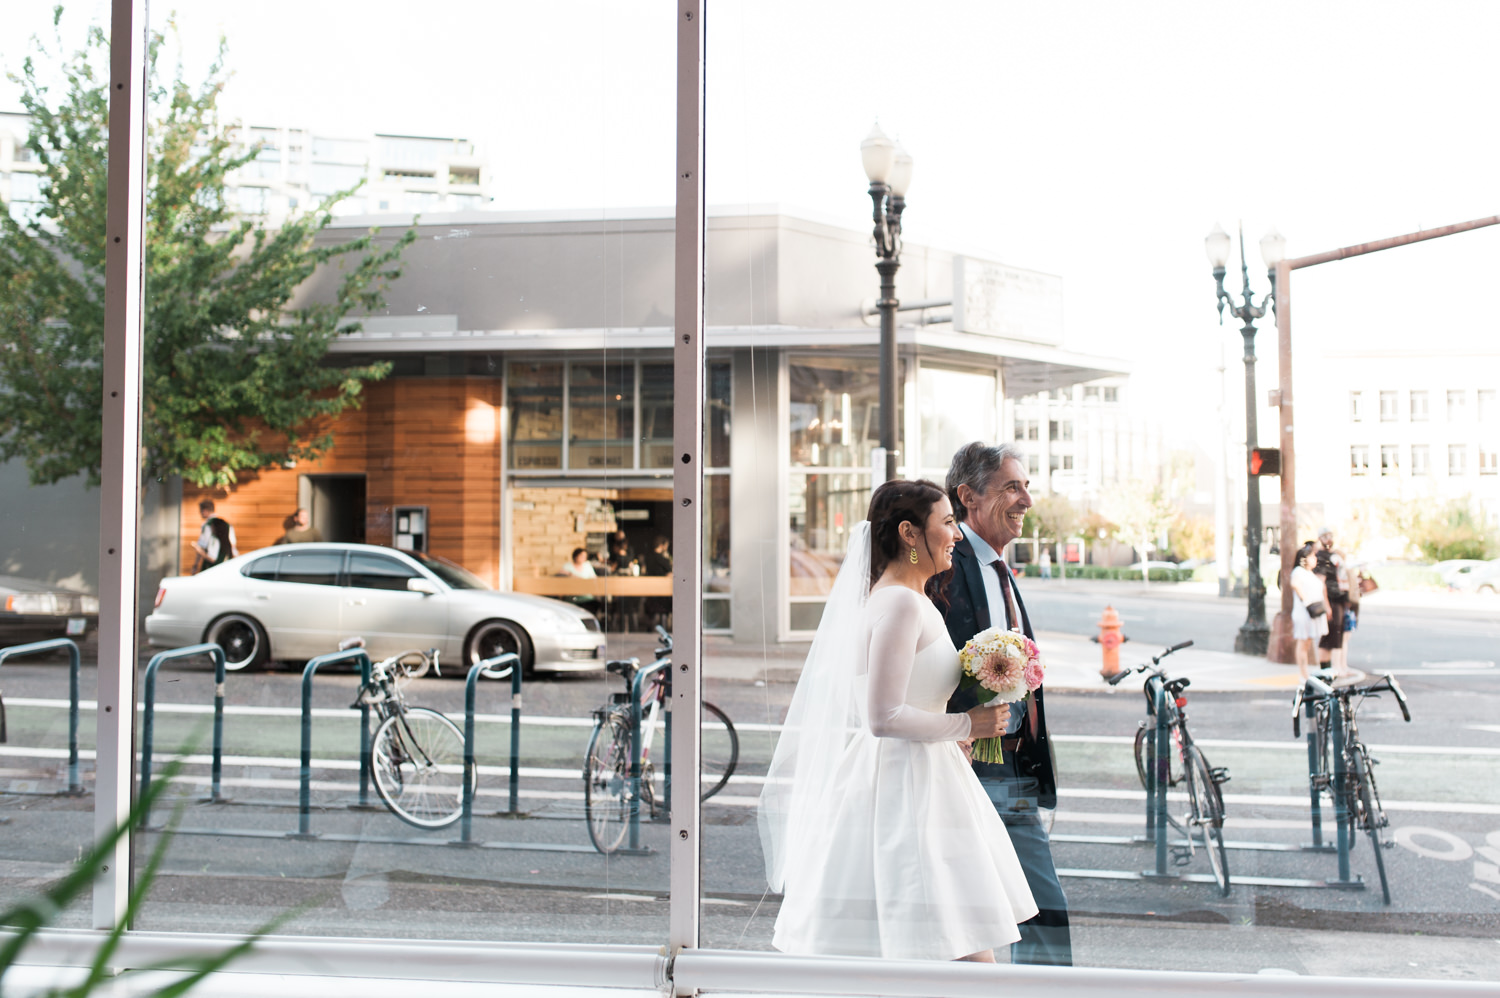 The bride walks with her father towards the aisle. by Ace Hotel wedding photographer Briana Morrison